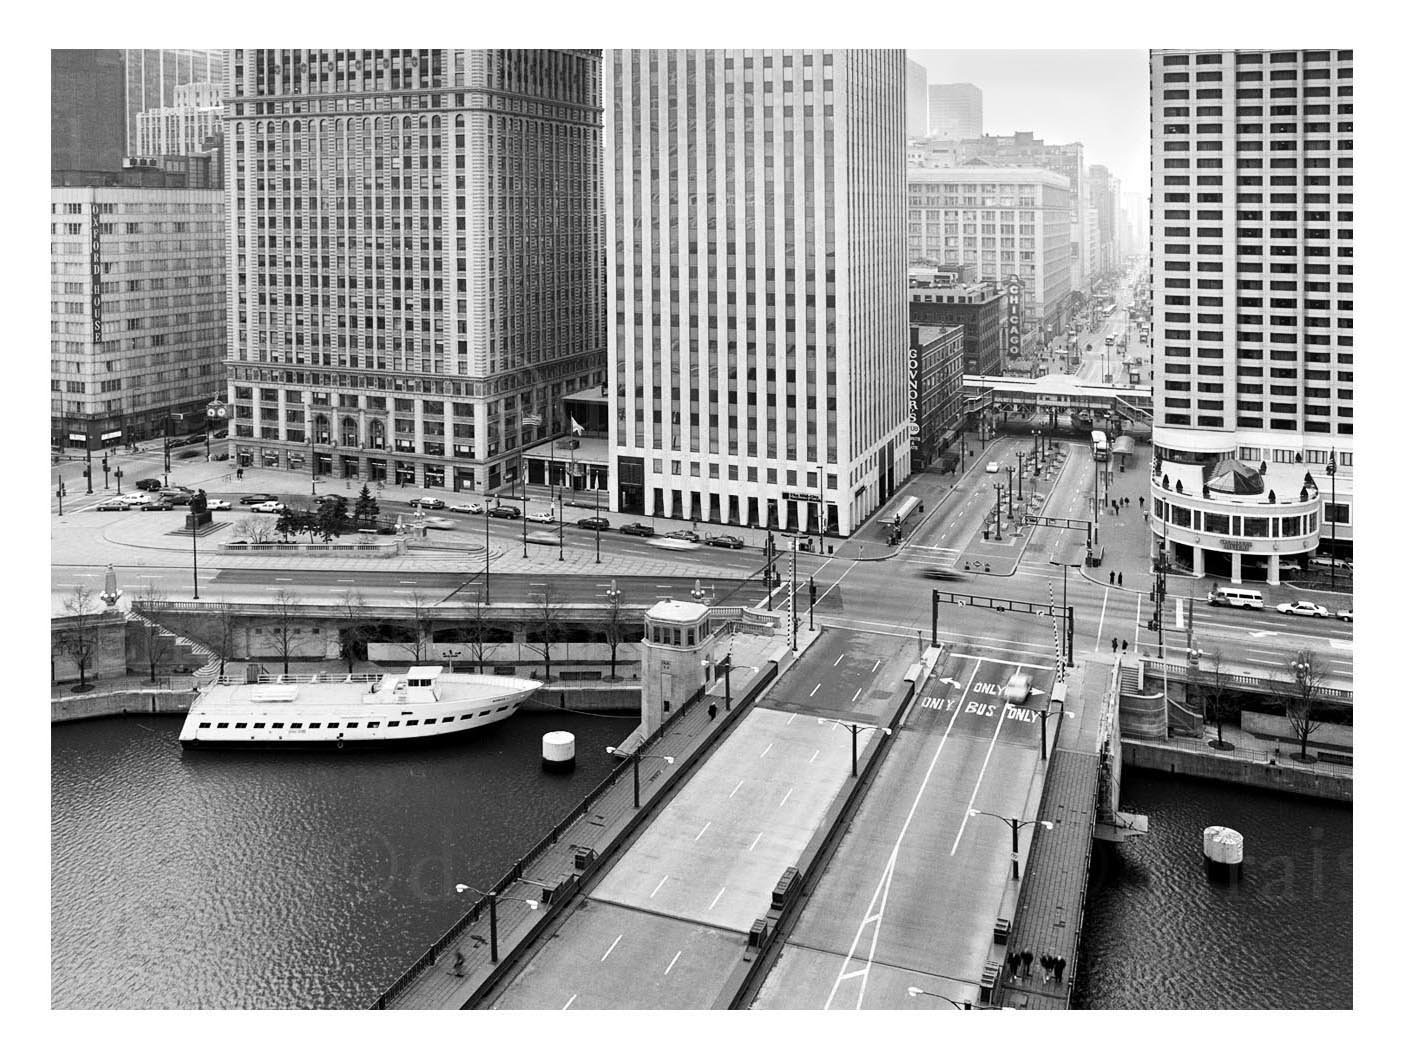 State Street and the Chicago River